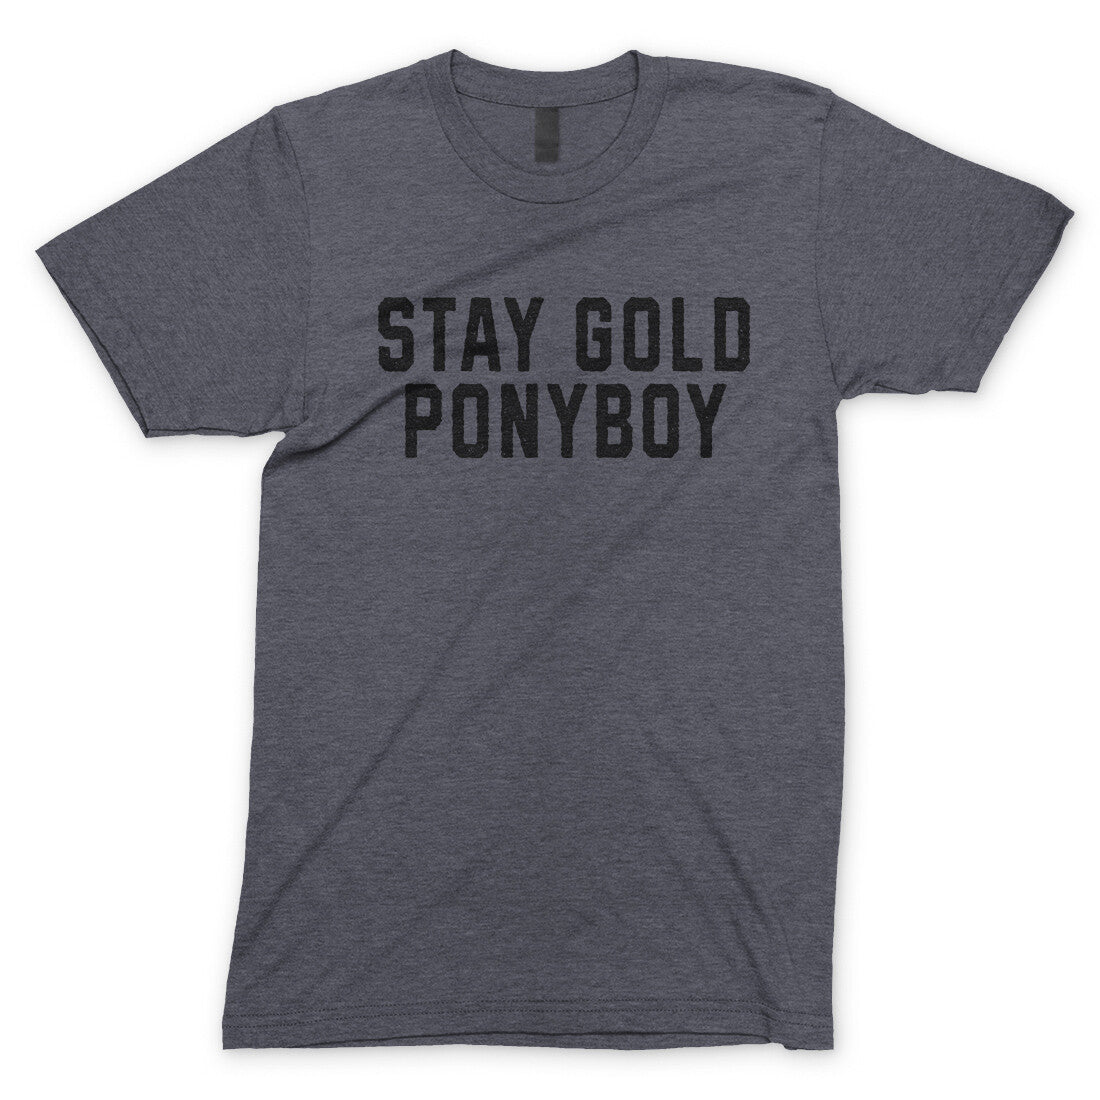 Stay Gold Ponyboy in Dark Heather Color